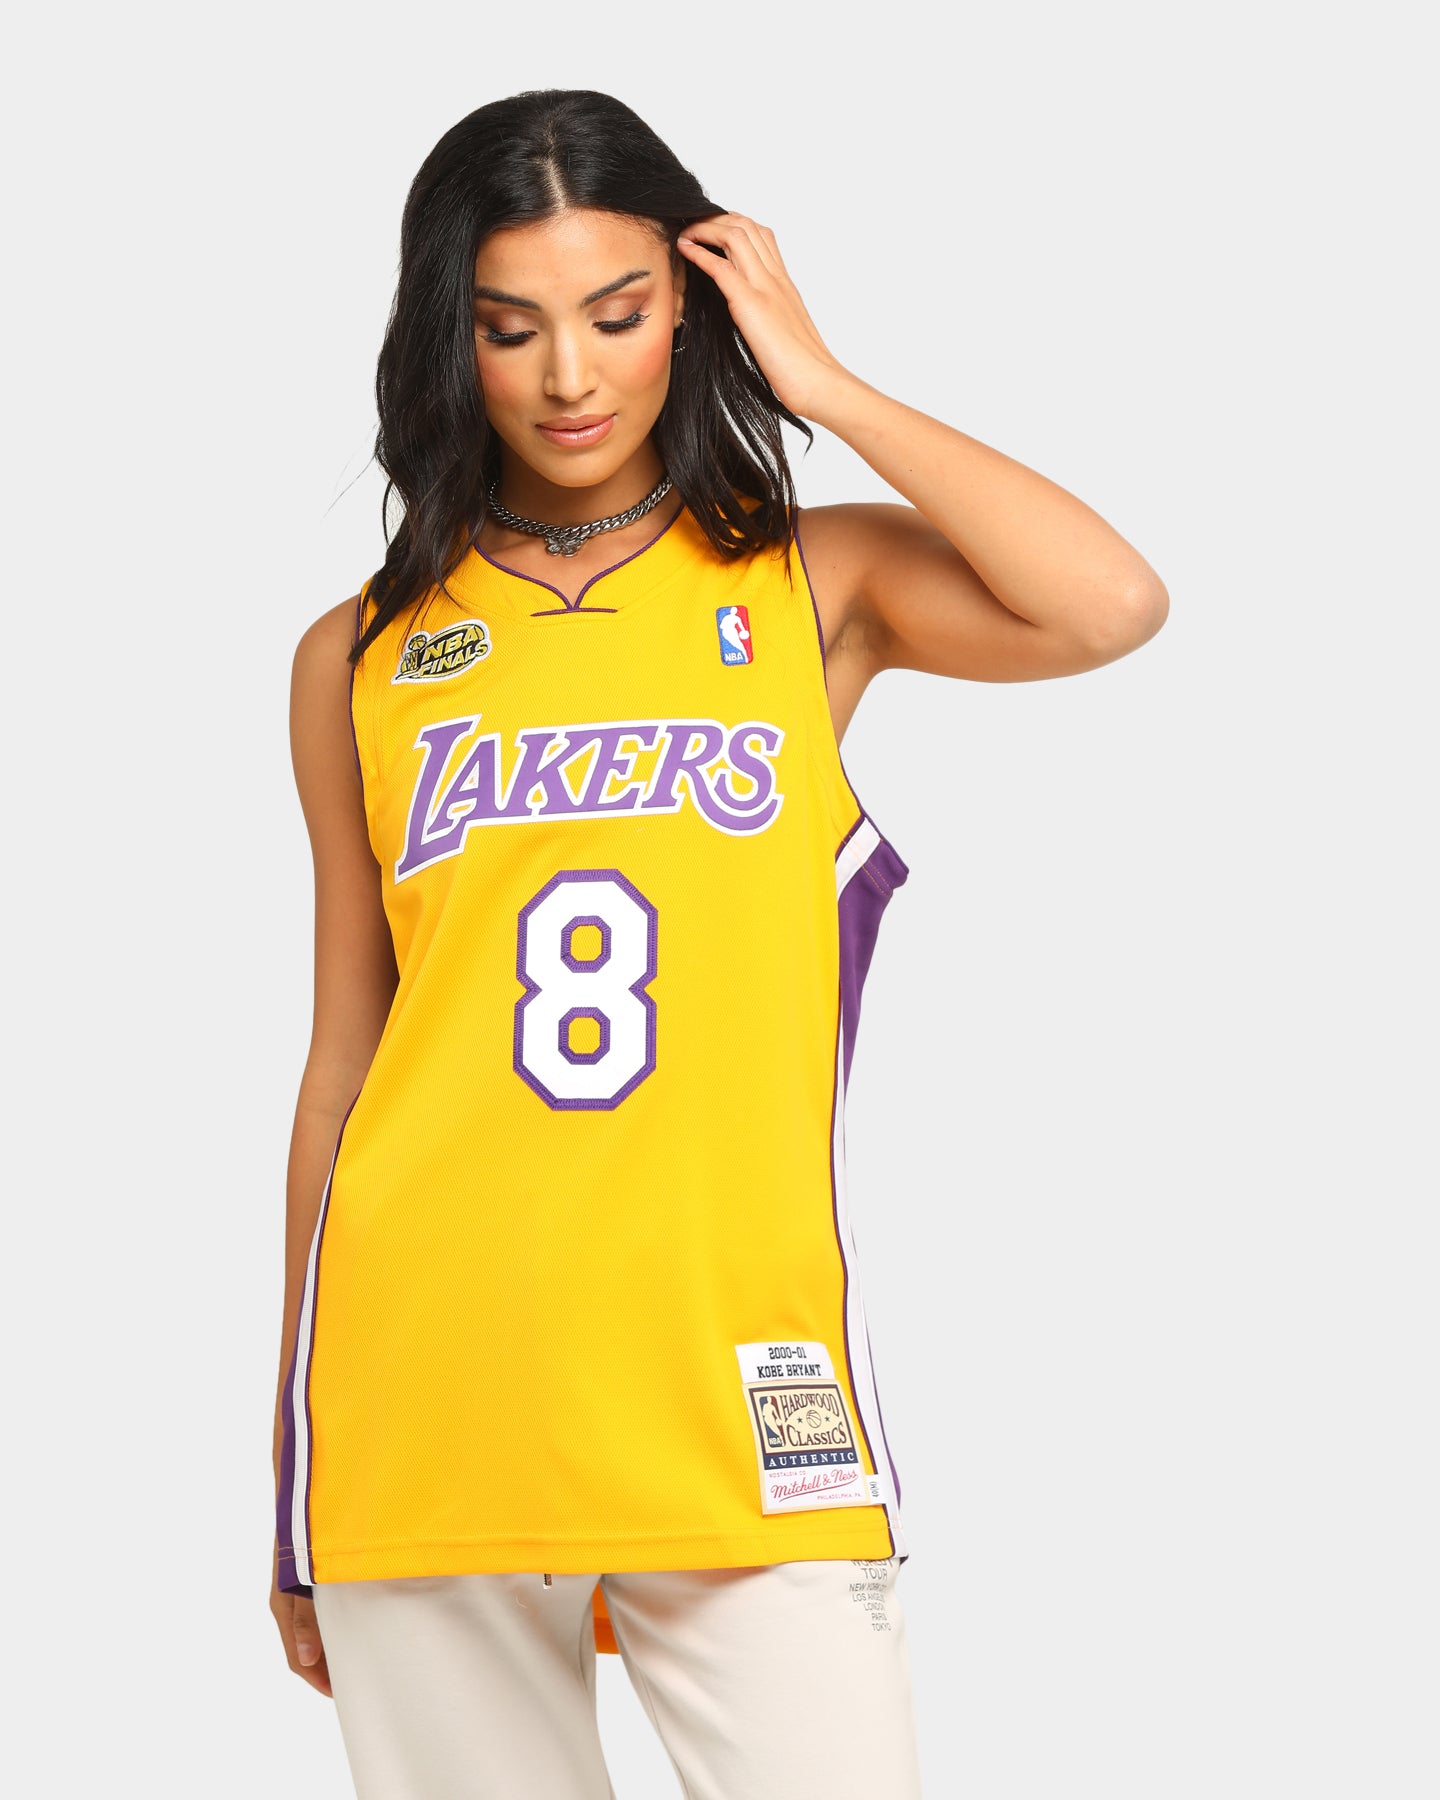 lakers jersey finals